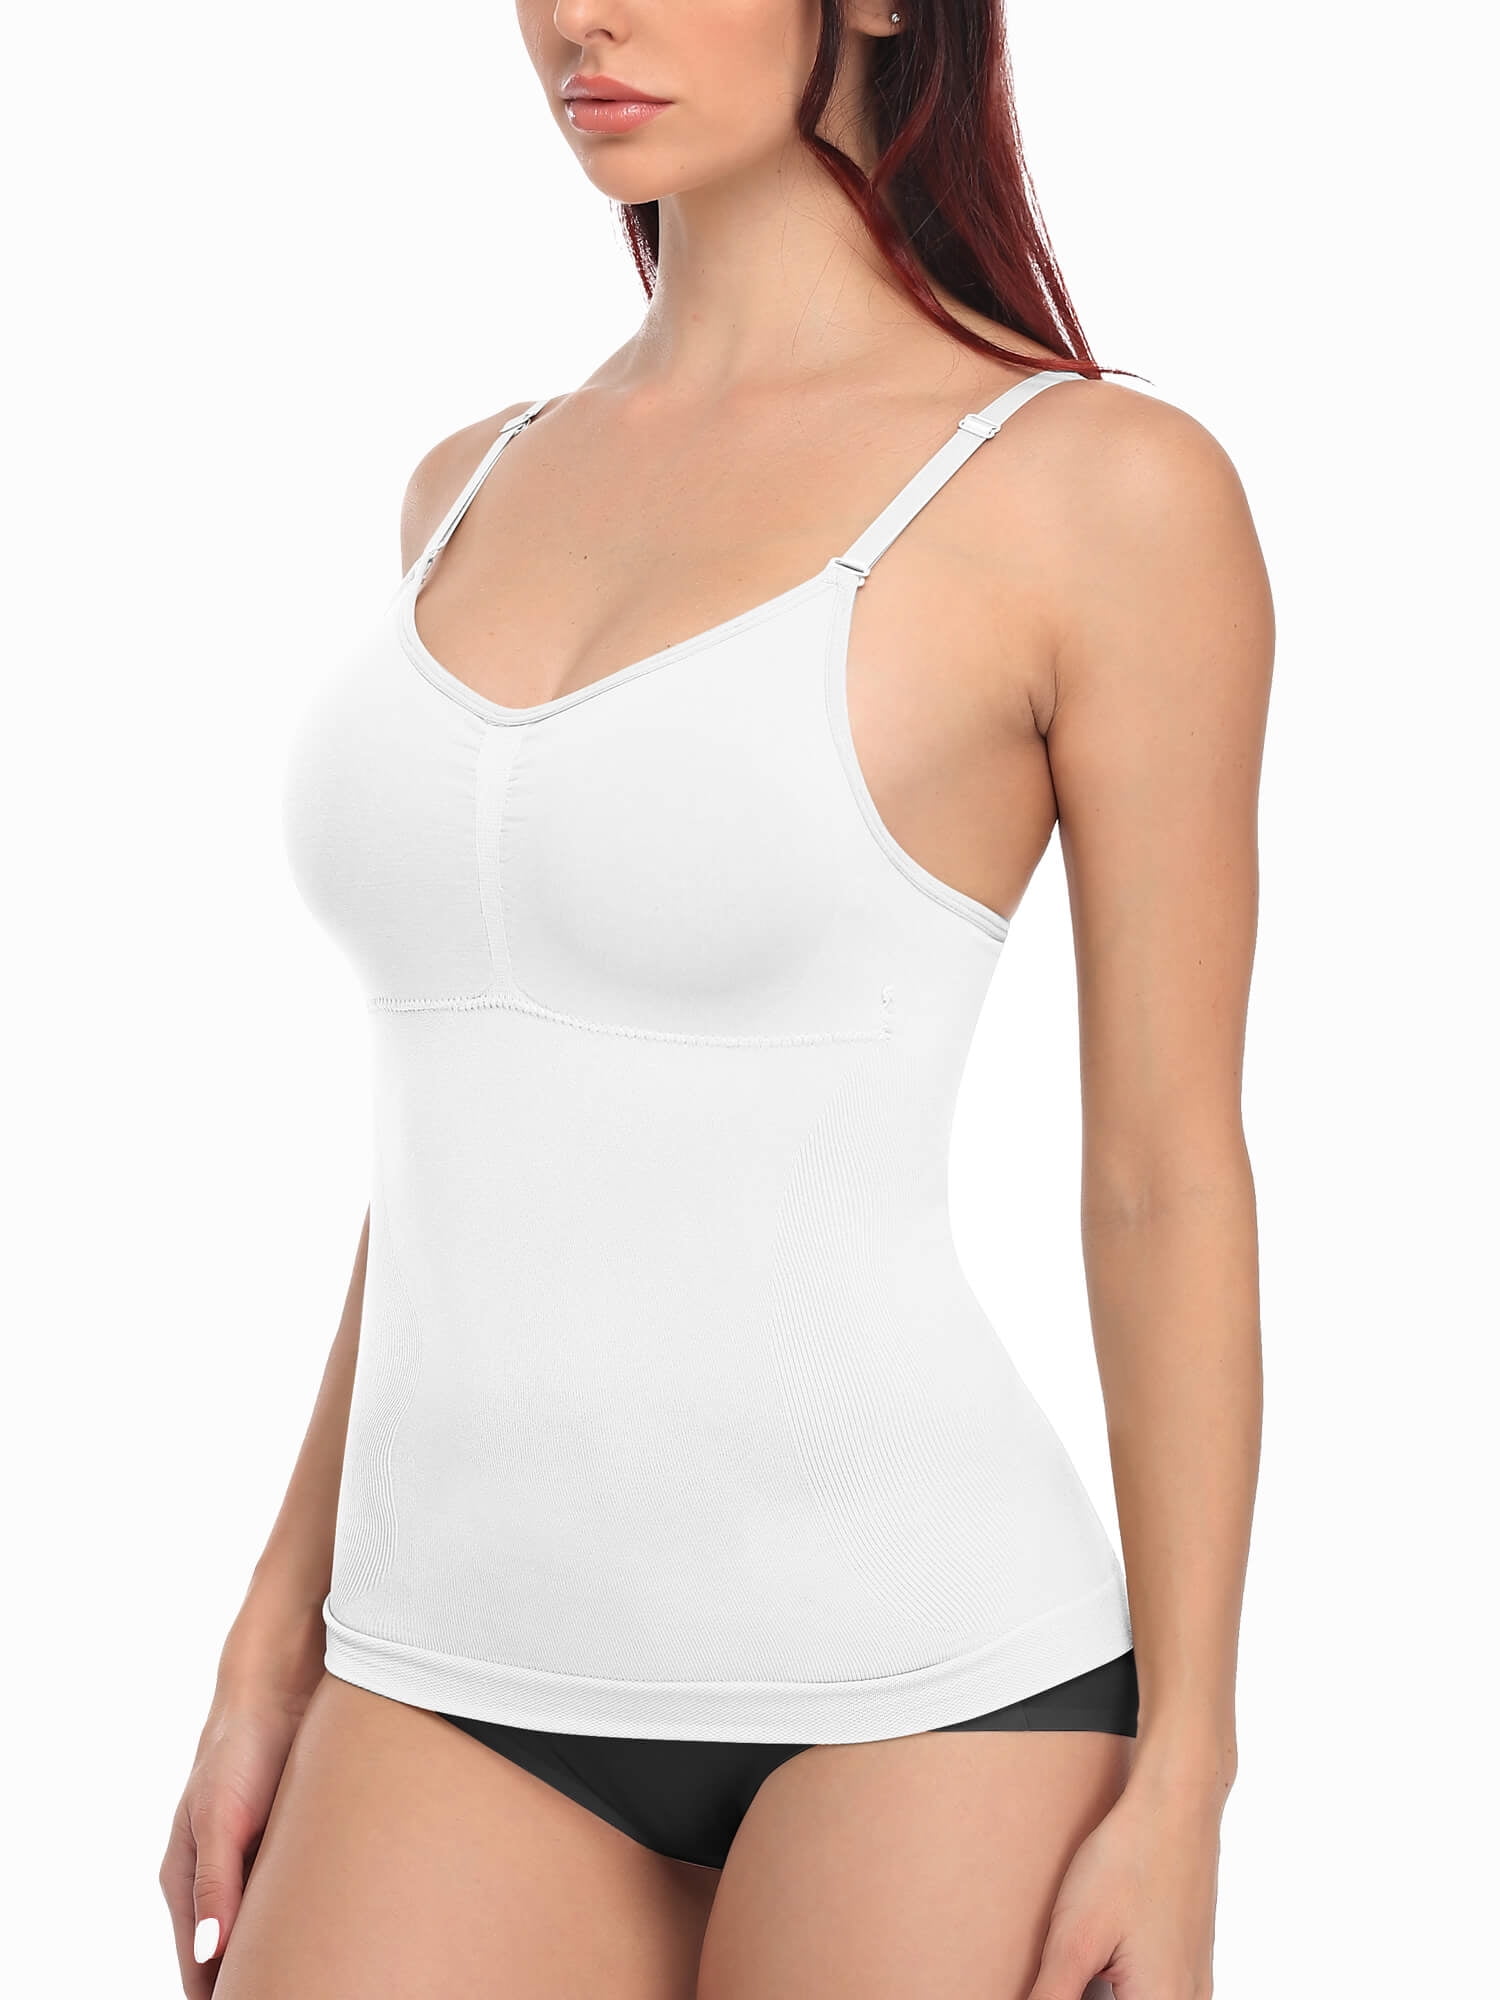 MANIFIQUE Women's Slimming Tank Top with Built in Bras, Everyday Shapewear,  White Compression Body Tank